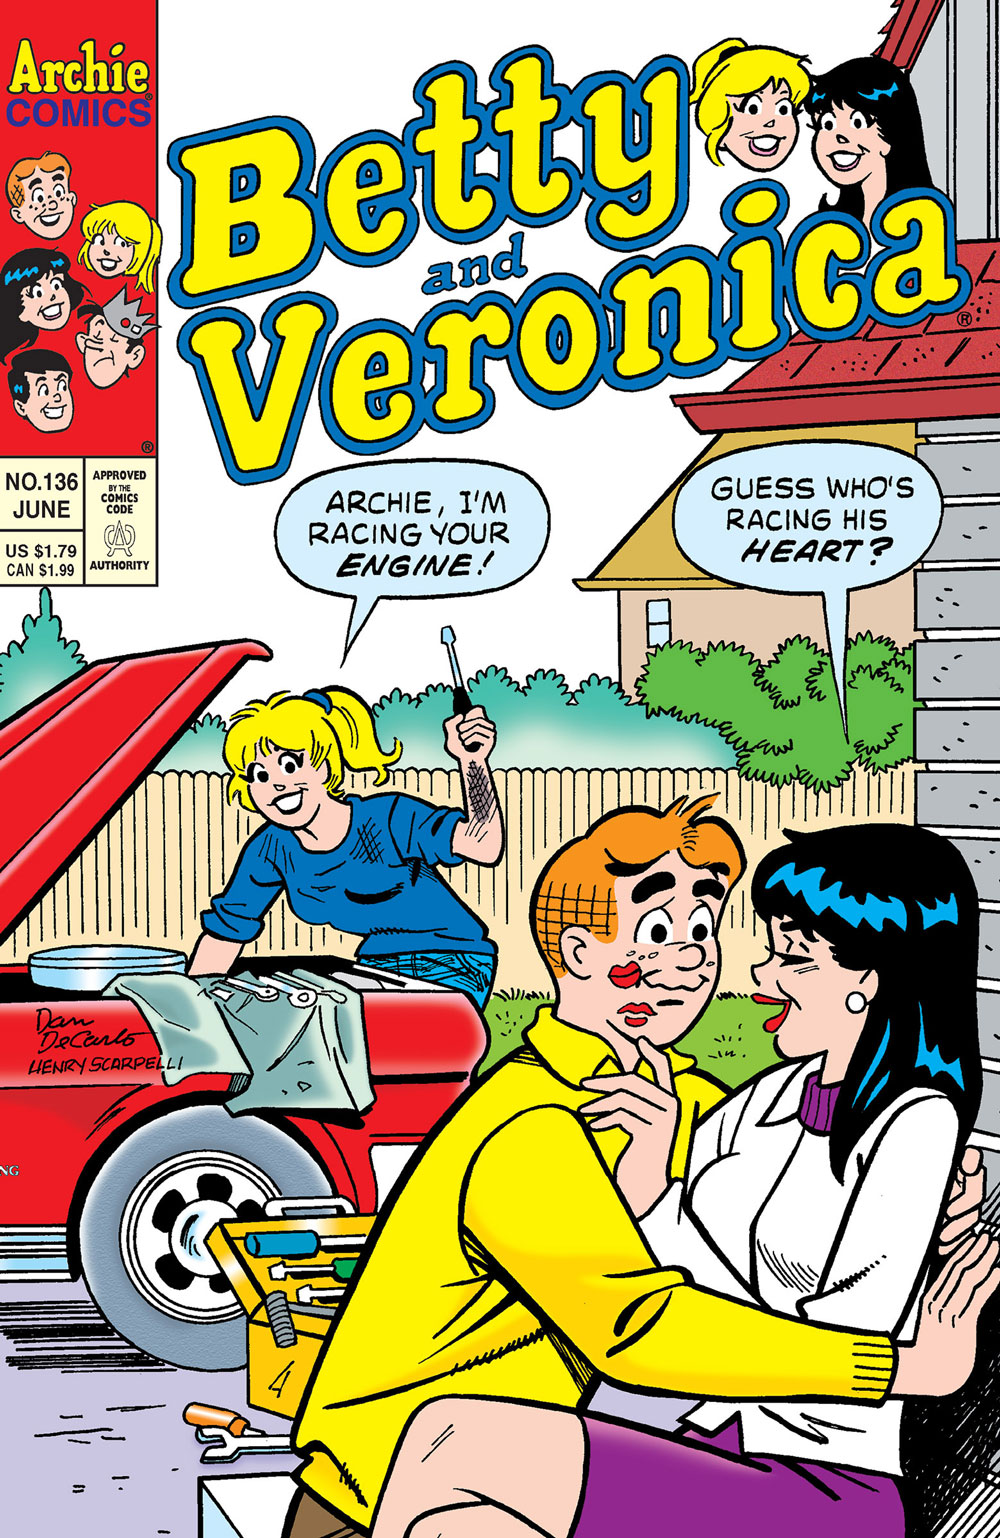 Betty fixes Archie's car while Veronica kisses him. Betty says she's racing his engine and Veronica says she's racing his heart.